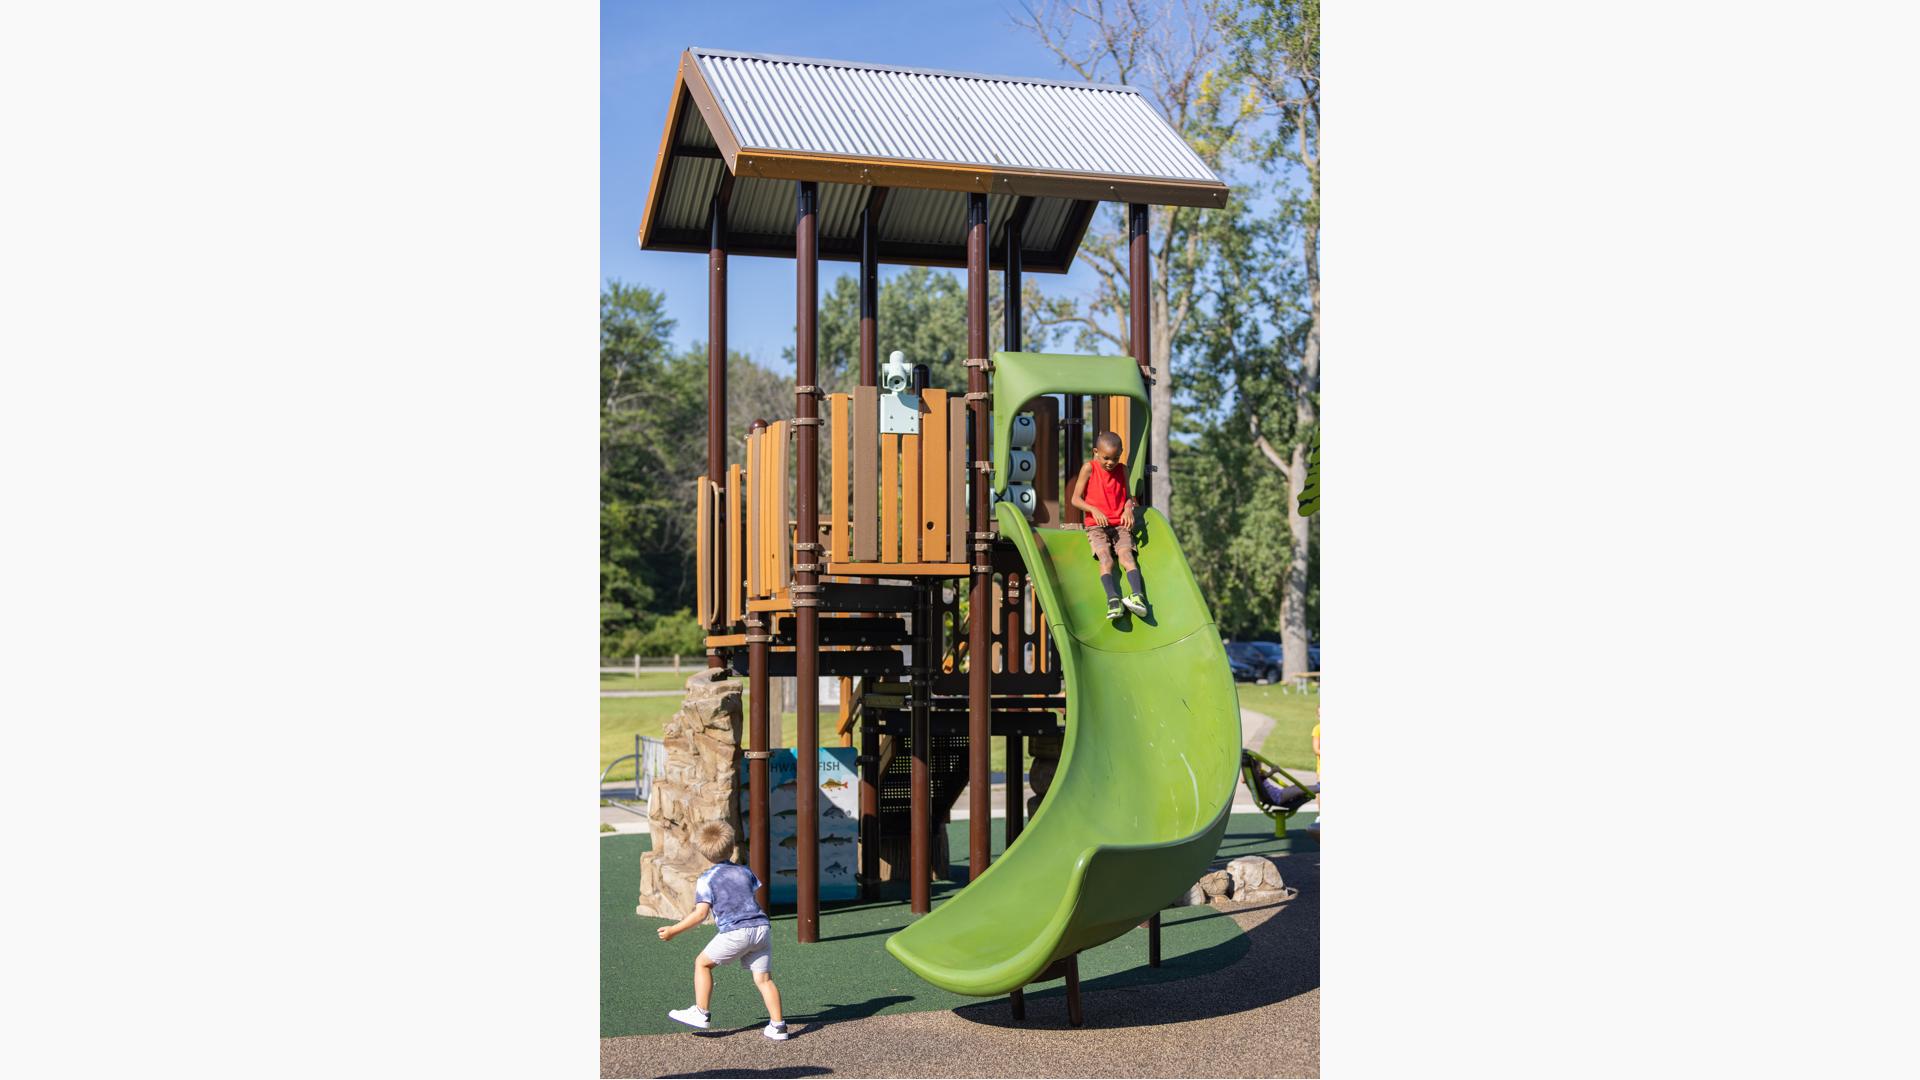 A natural wood-looking play structure with apple green Alpine Slide by Landscape Structures.